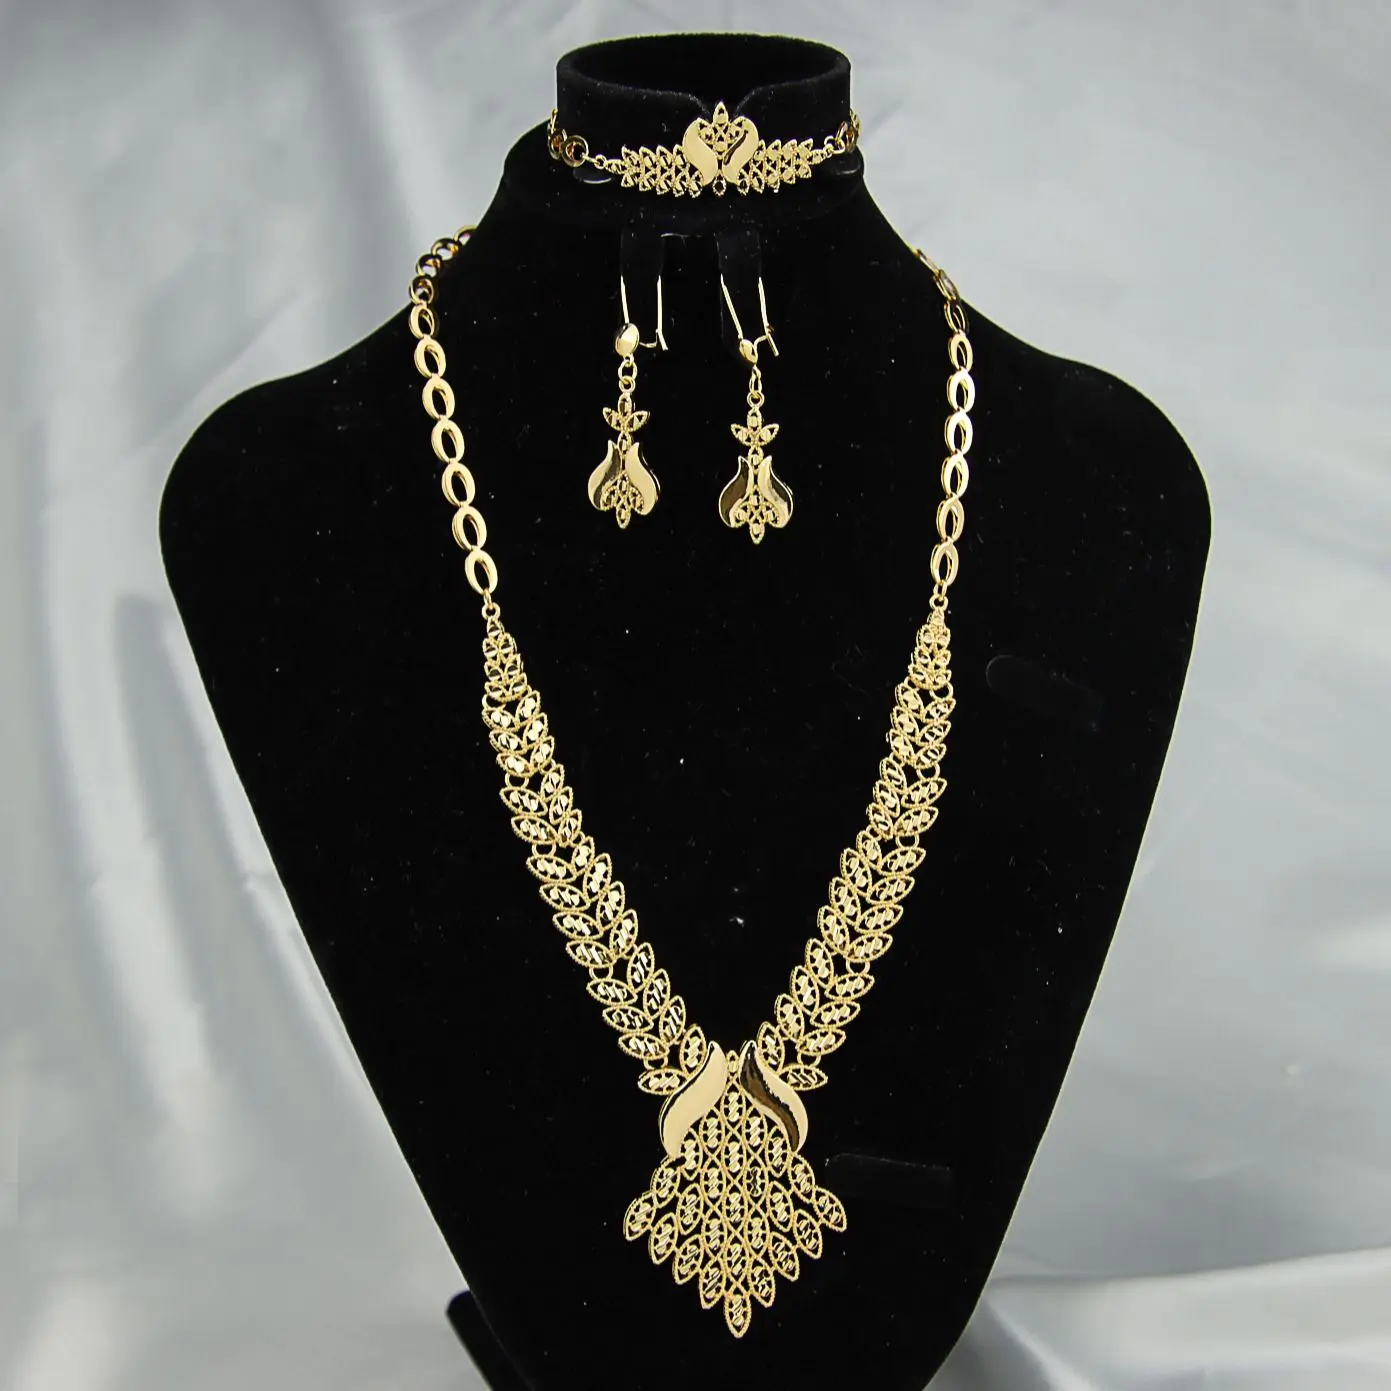 

Ethiopian Africa Bride Chain Jewelry Sets 24k Gold Plated Middle East Dubai Full Jewelrys Luxury Wedding Party Accessories